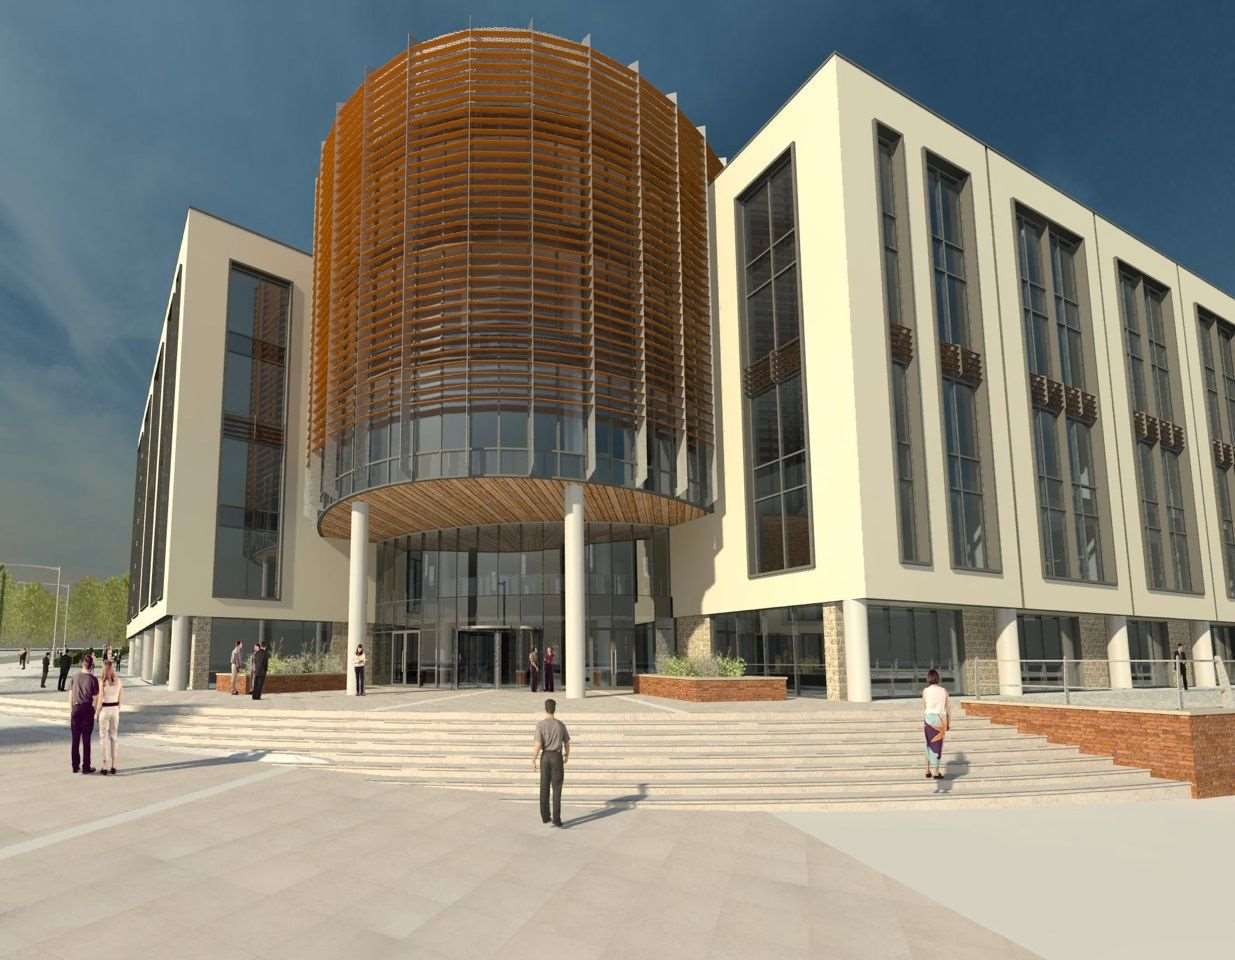 An artist's impression of what the new Ashford college could look like